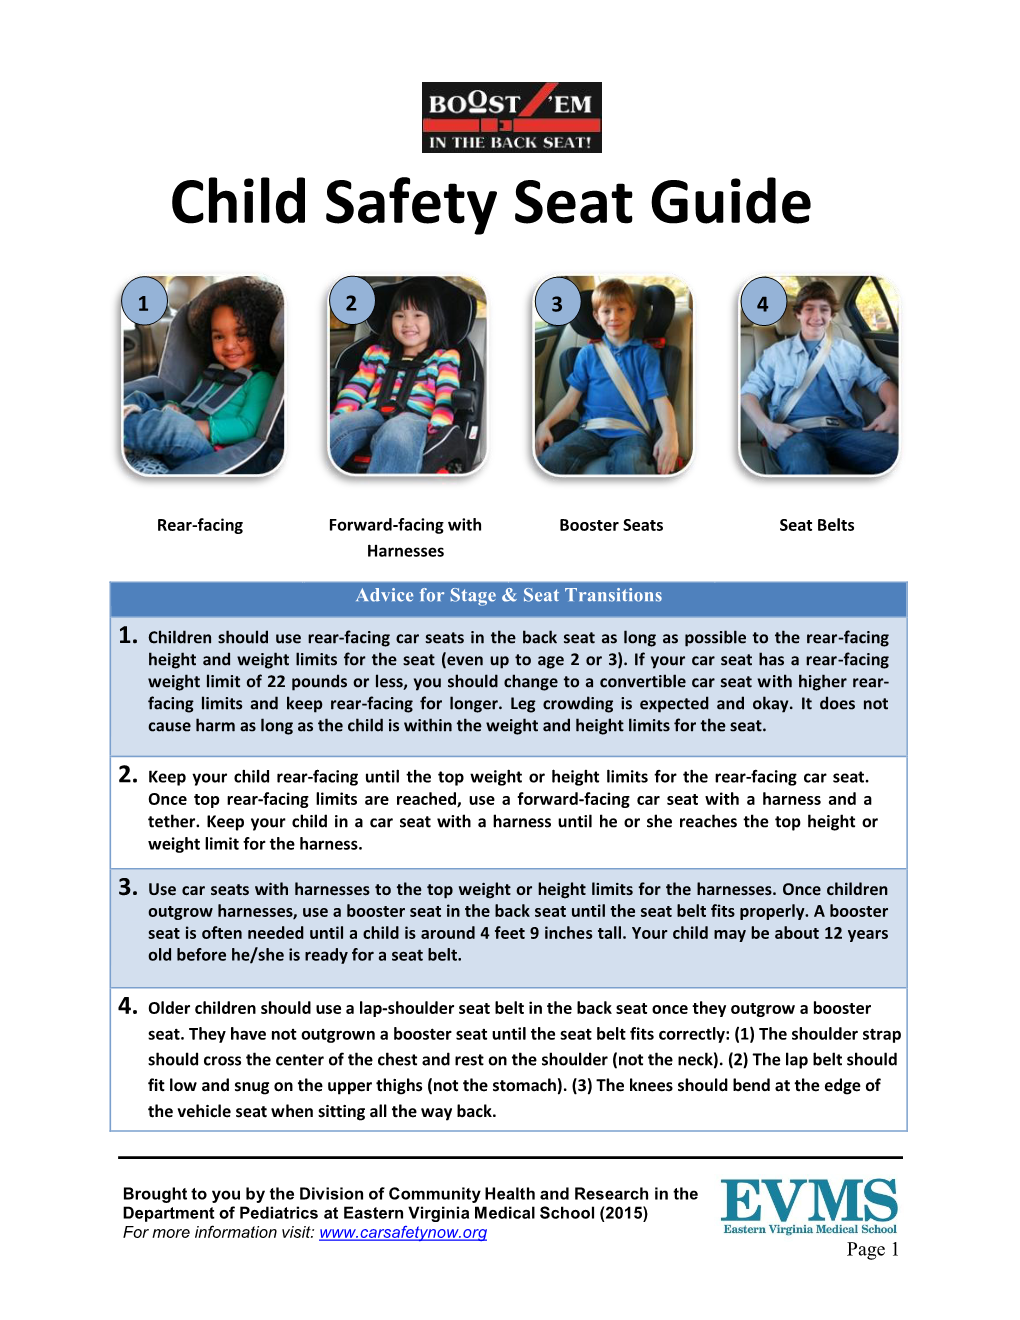 Why Is Child Passenger Safety Important